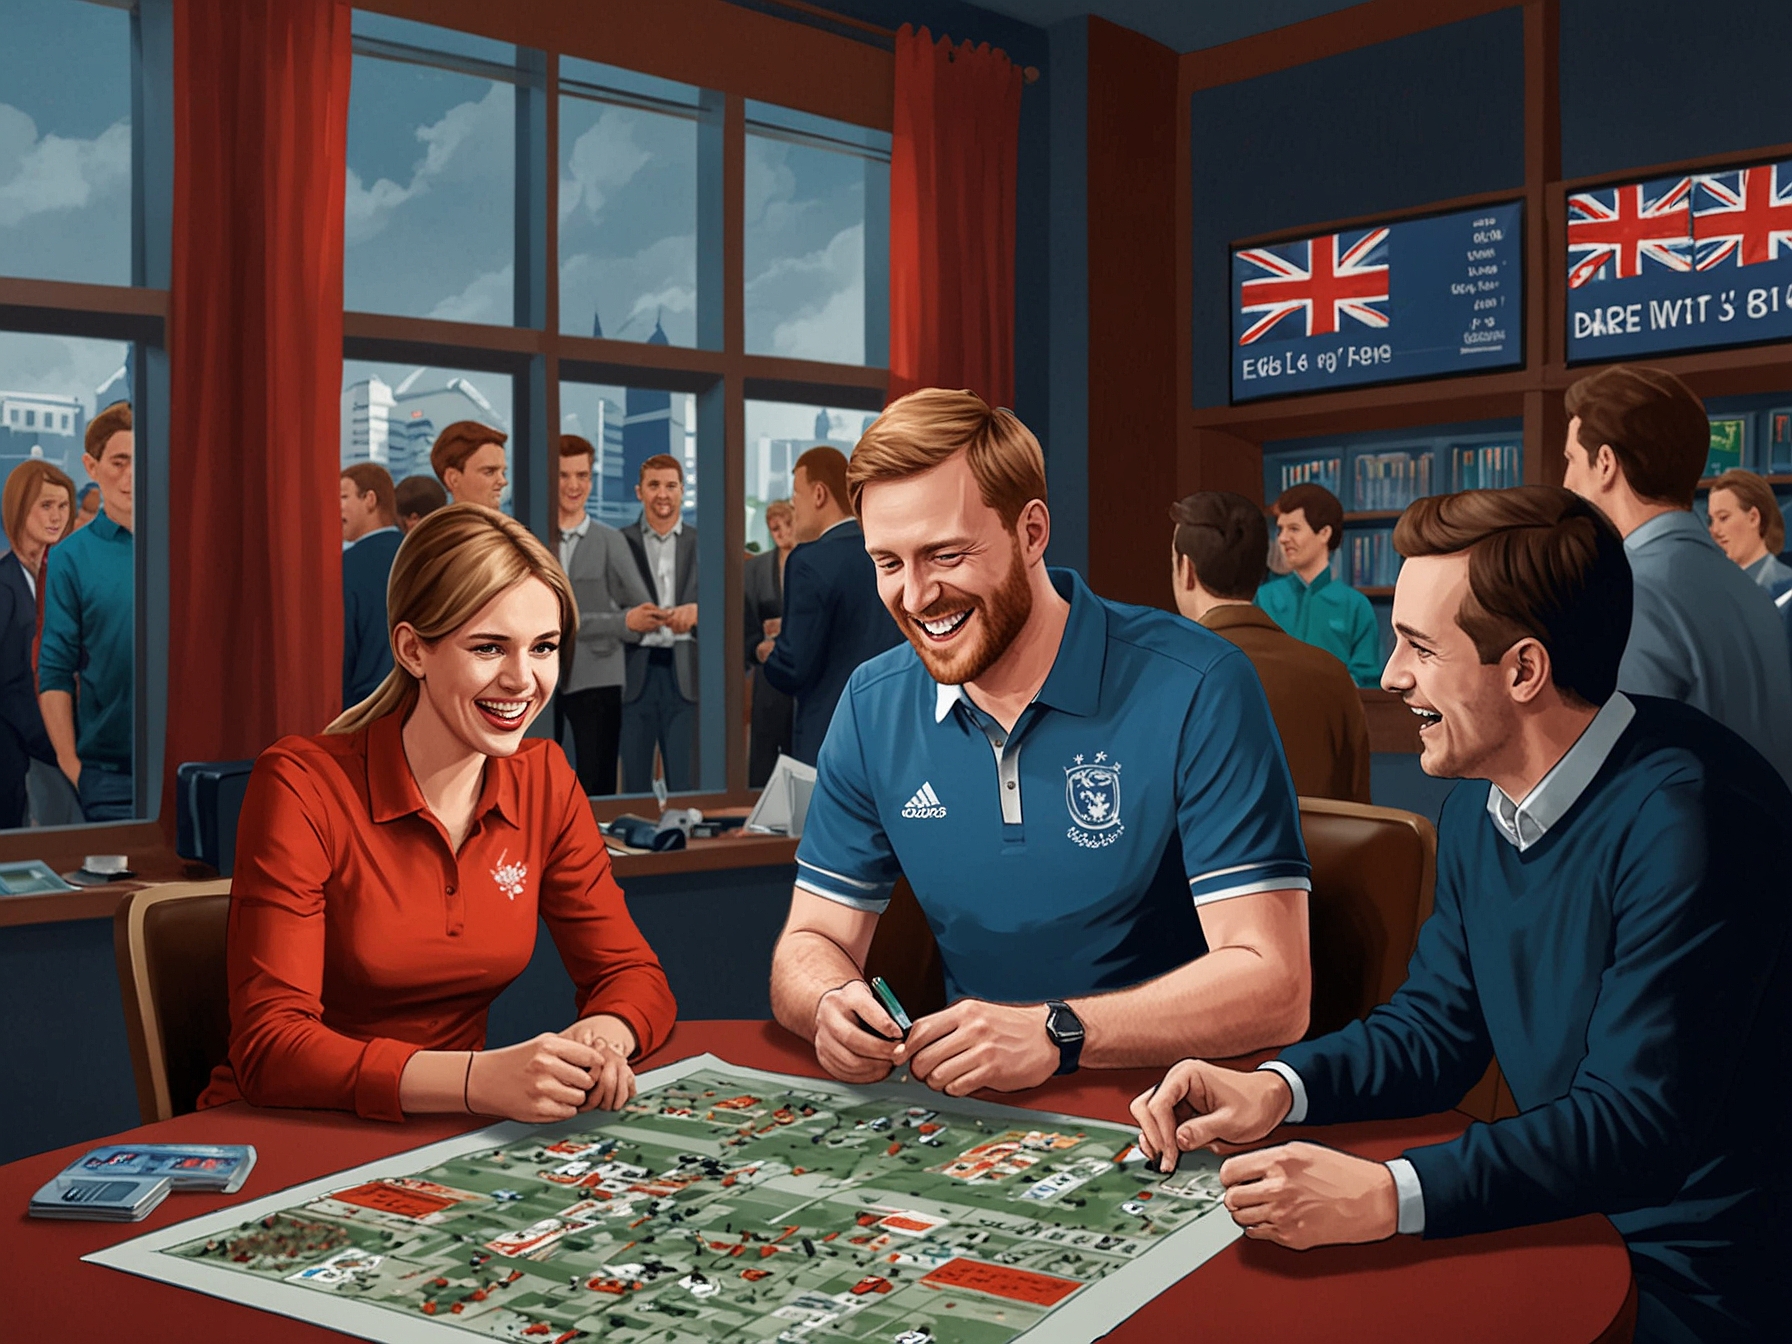 An illustration of Betfred's £50 free bets promotion, showing enthusiastic football fans placing bets, capturing the excitement and fan engagement for the Germany vs Denmark match.